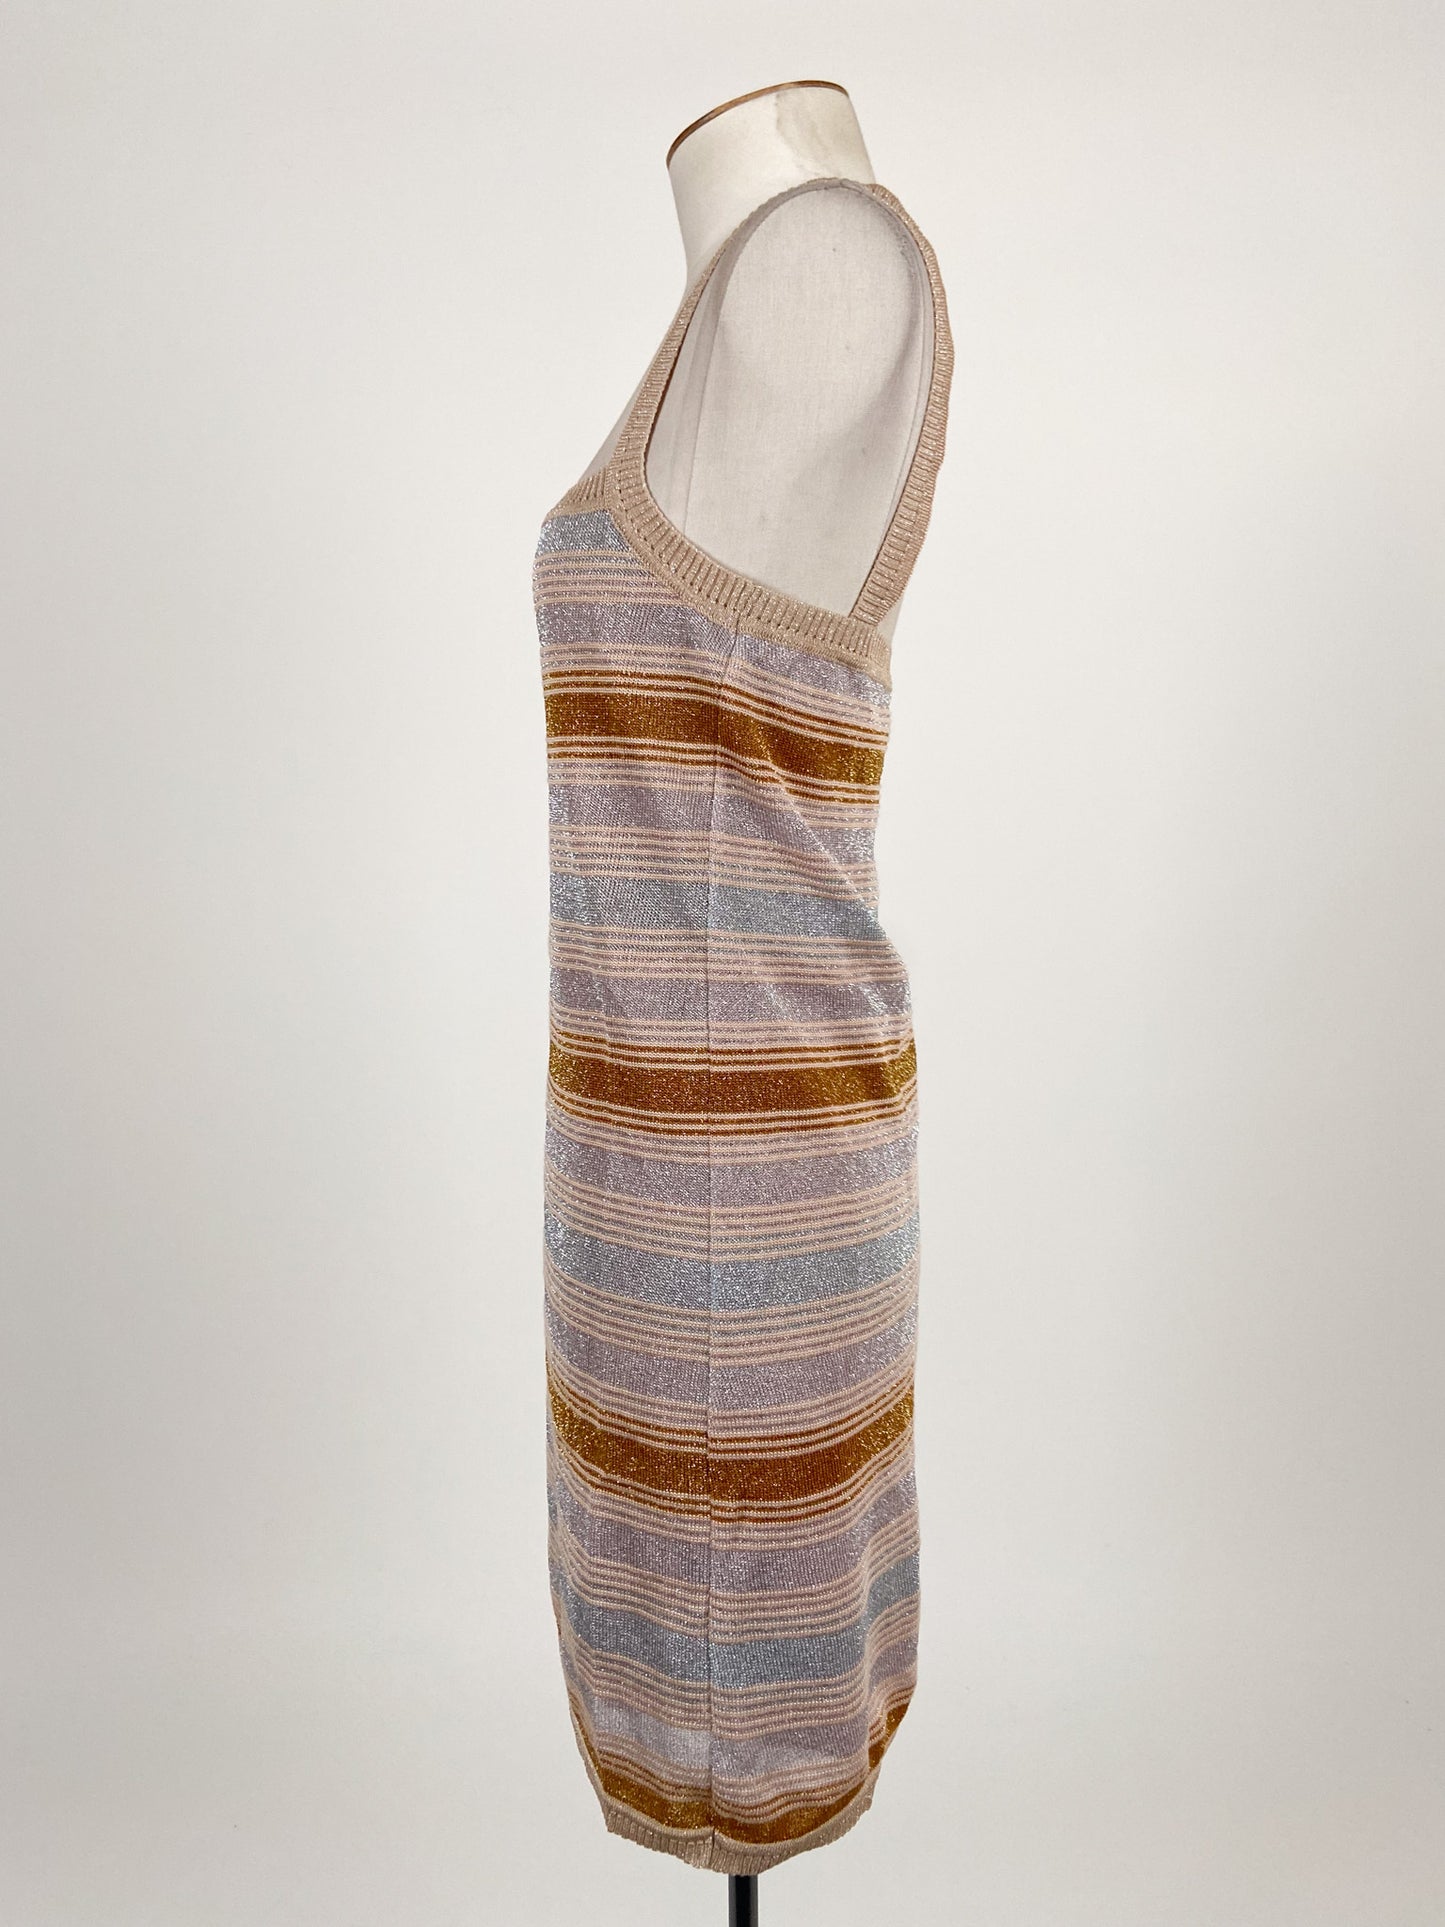 Suboo | Multicoloured Cocktail Dress | Size S